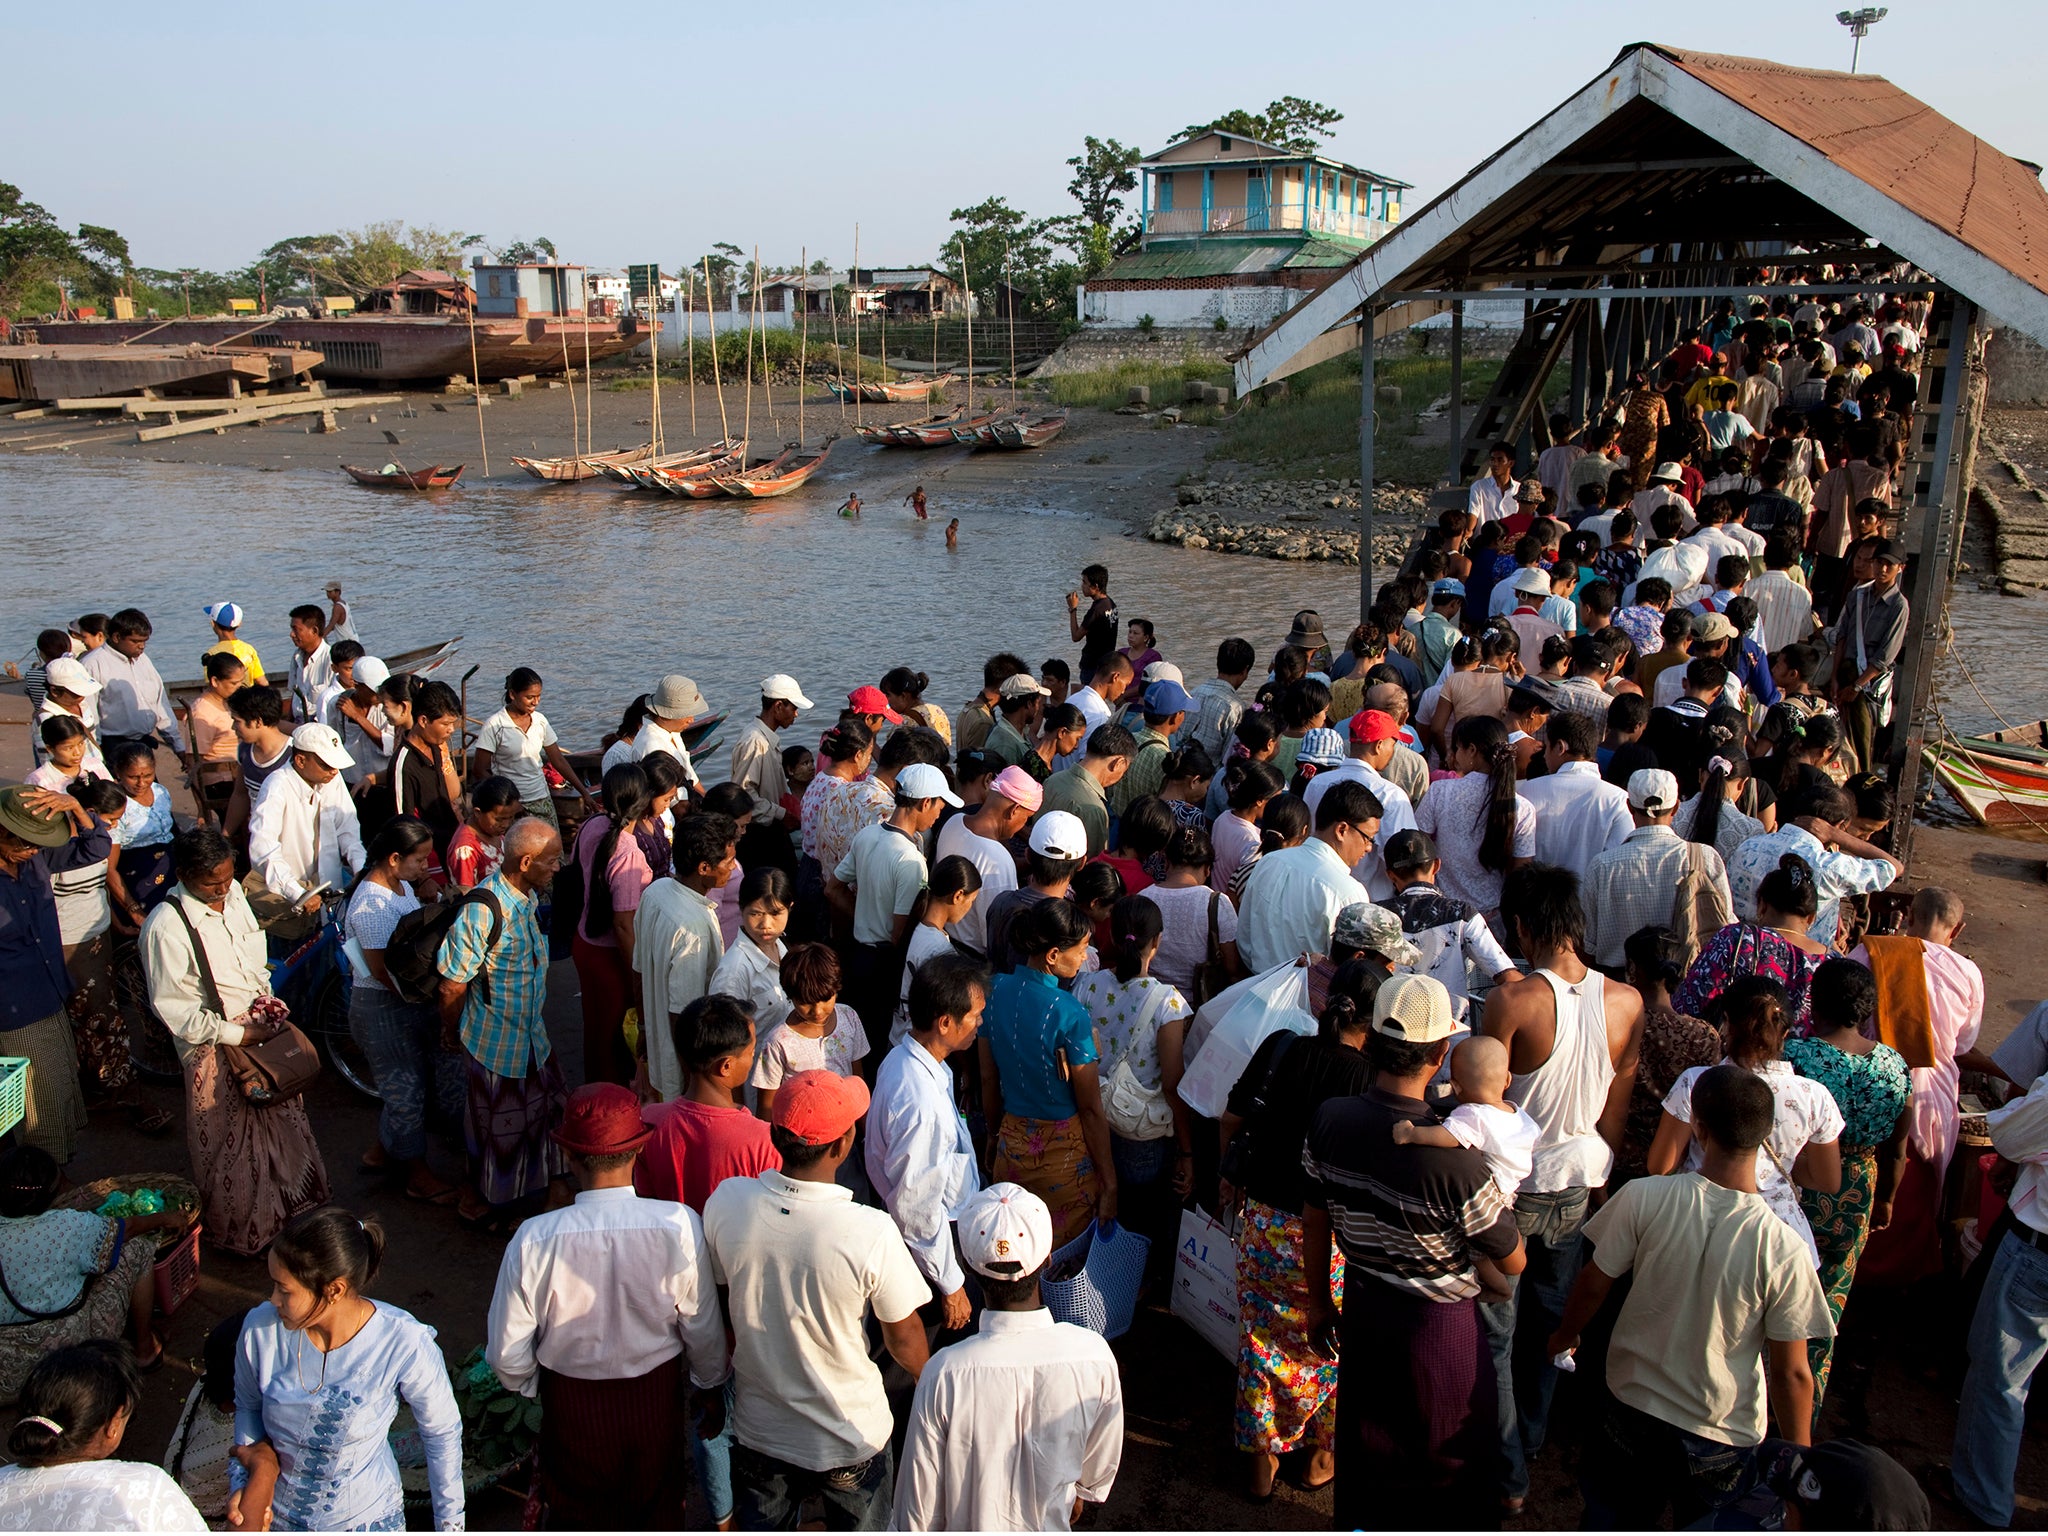 Many people in Myanmar rely on travelling on poorly-maintained ferries